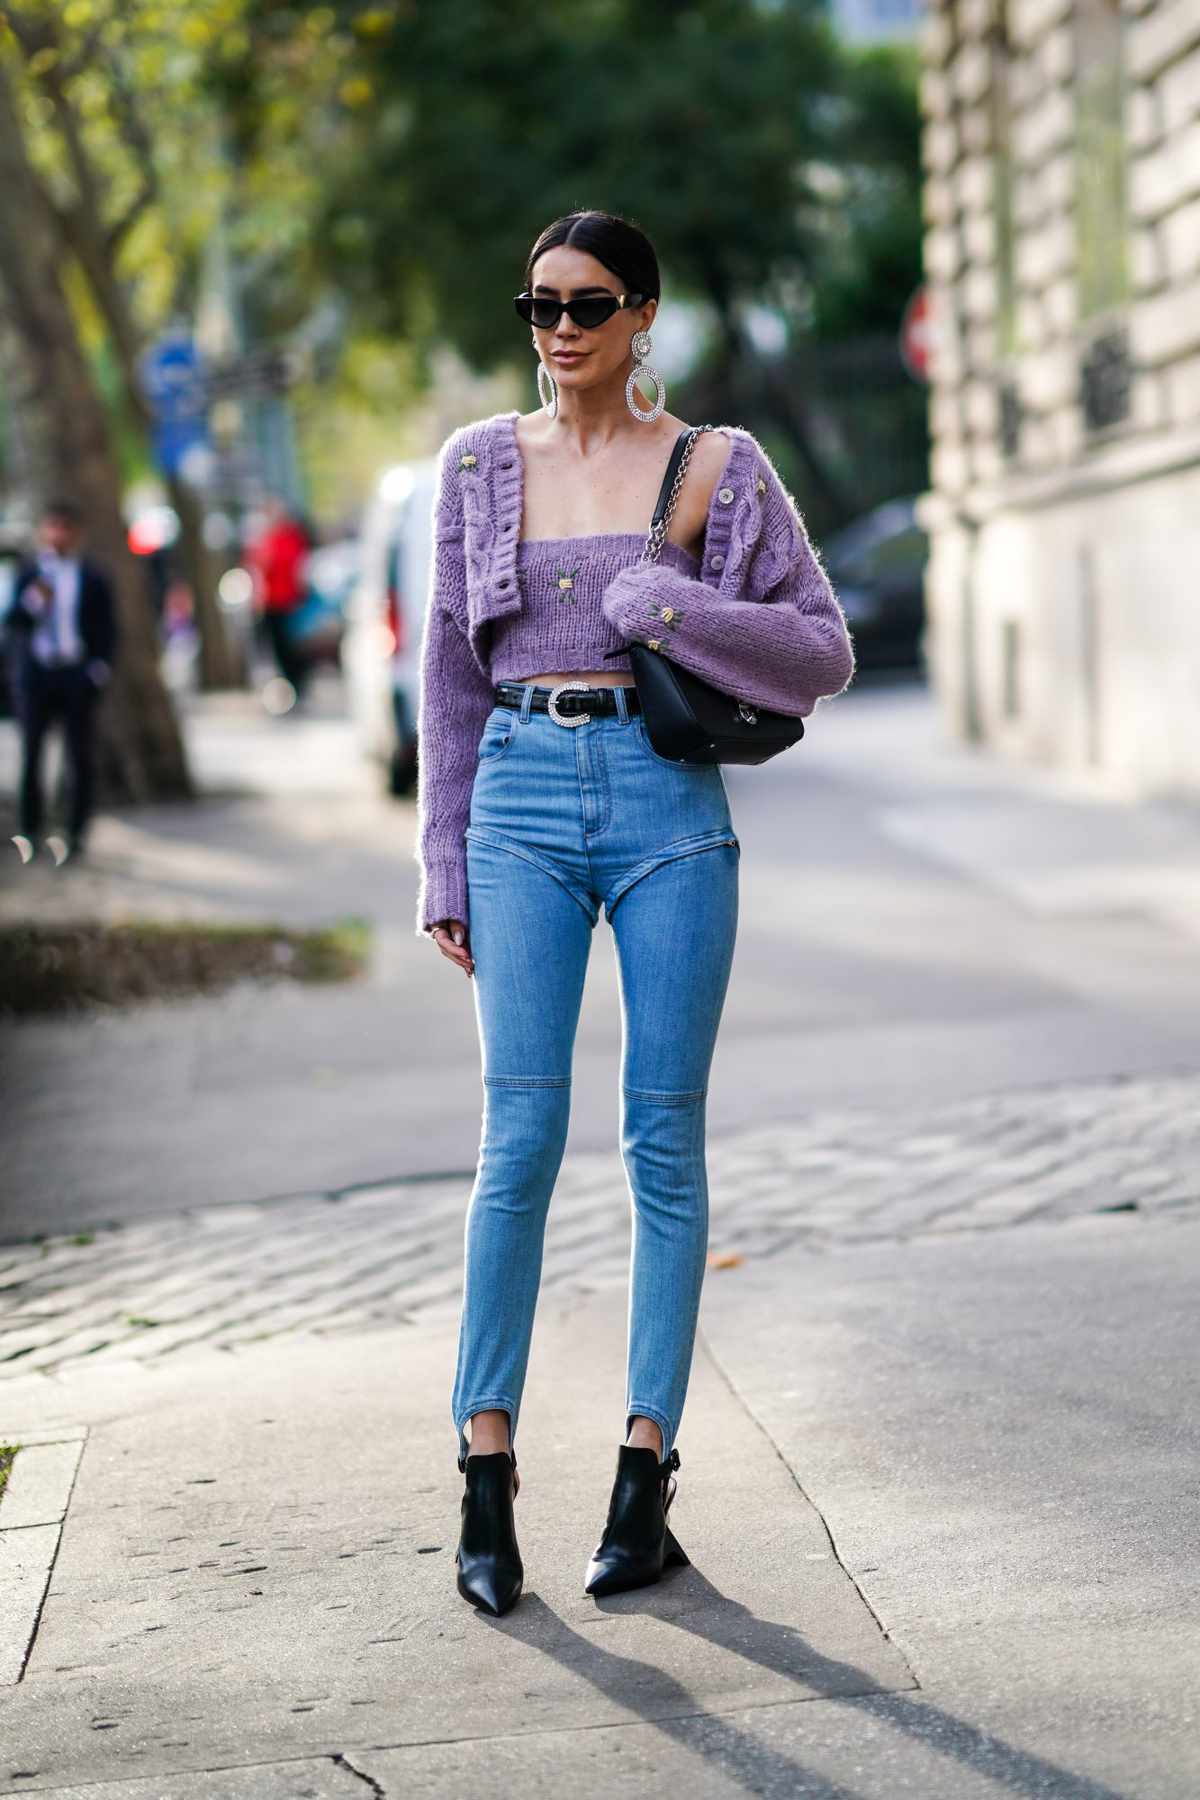 Matching Sweater Sets Are One of the Best Fashion Trends of 2020 | InStyle